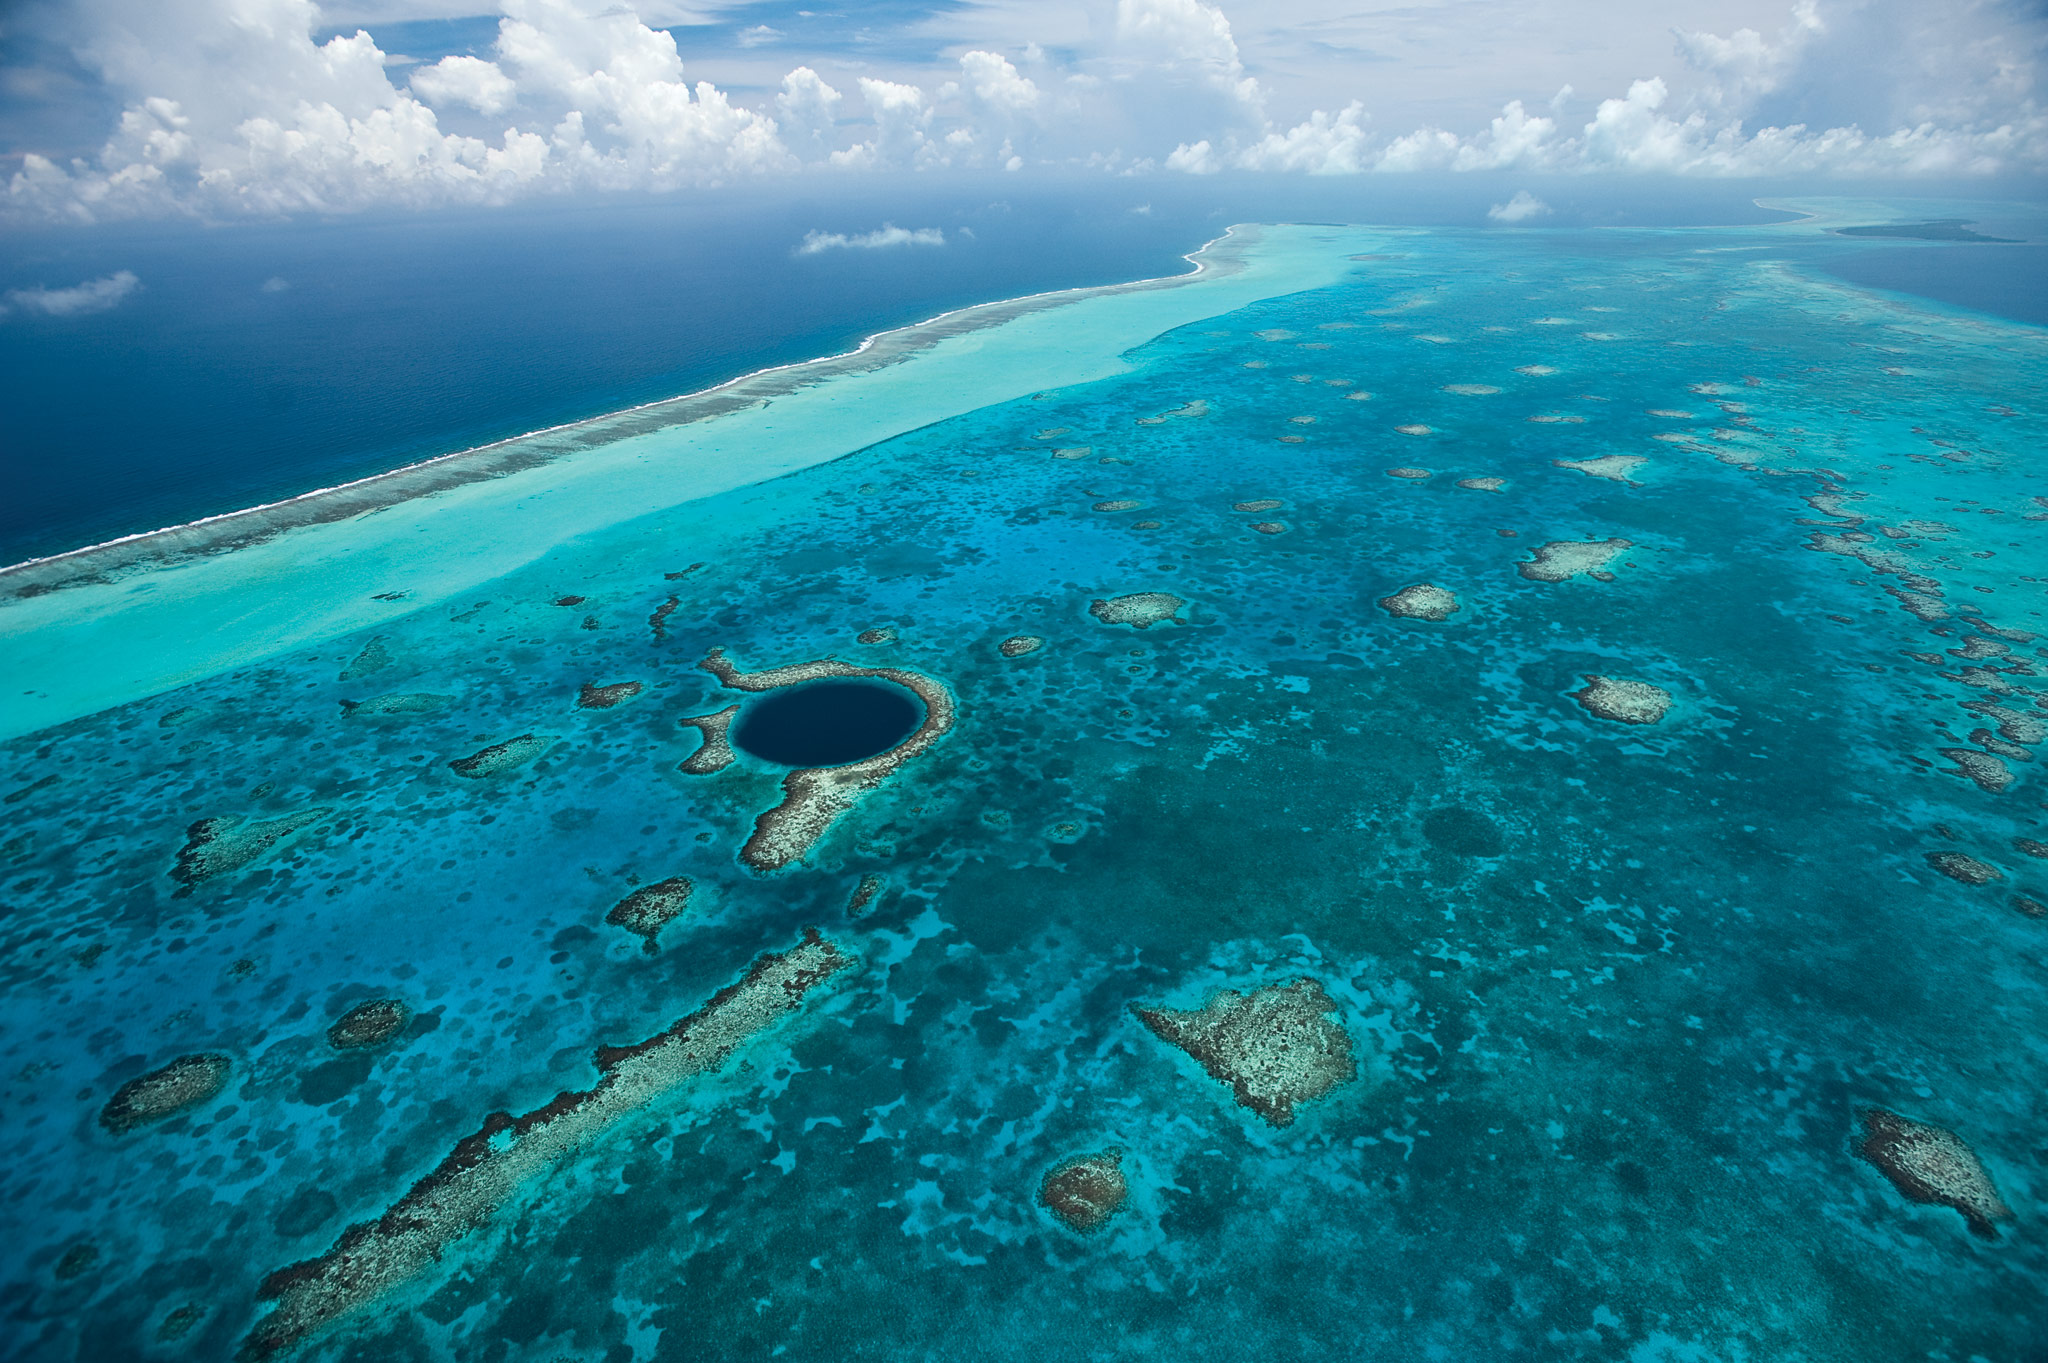 Belize Surf and Turf vacations gives you the chance to experience the Great Barrier Reef & Blue Hole!